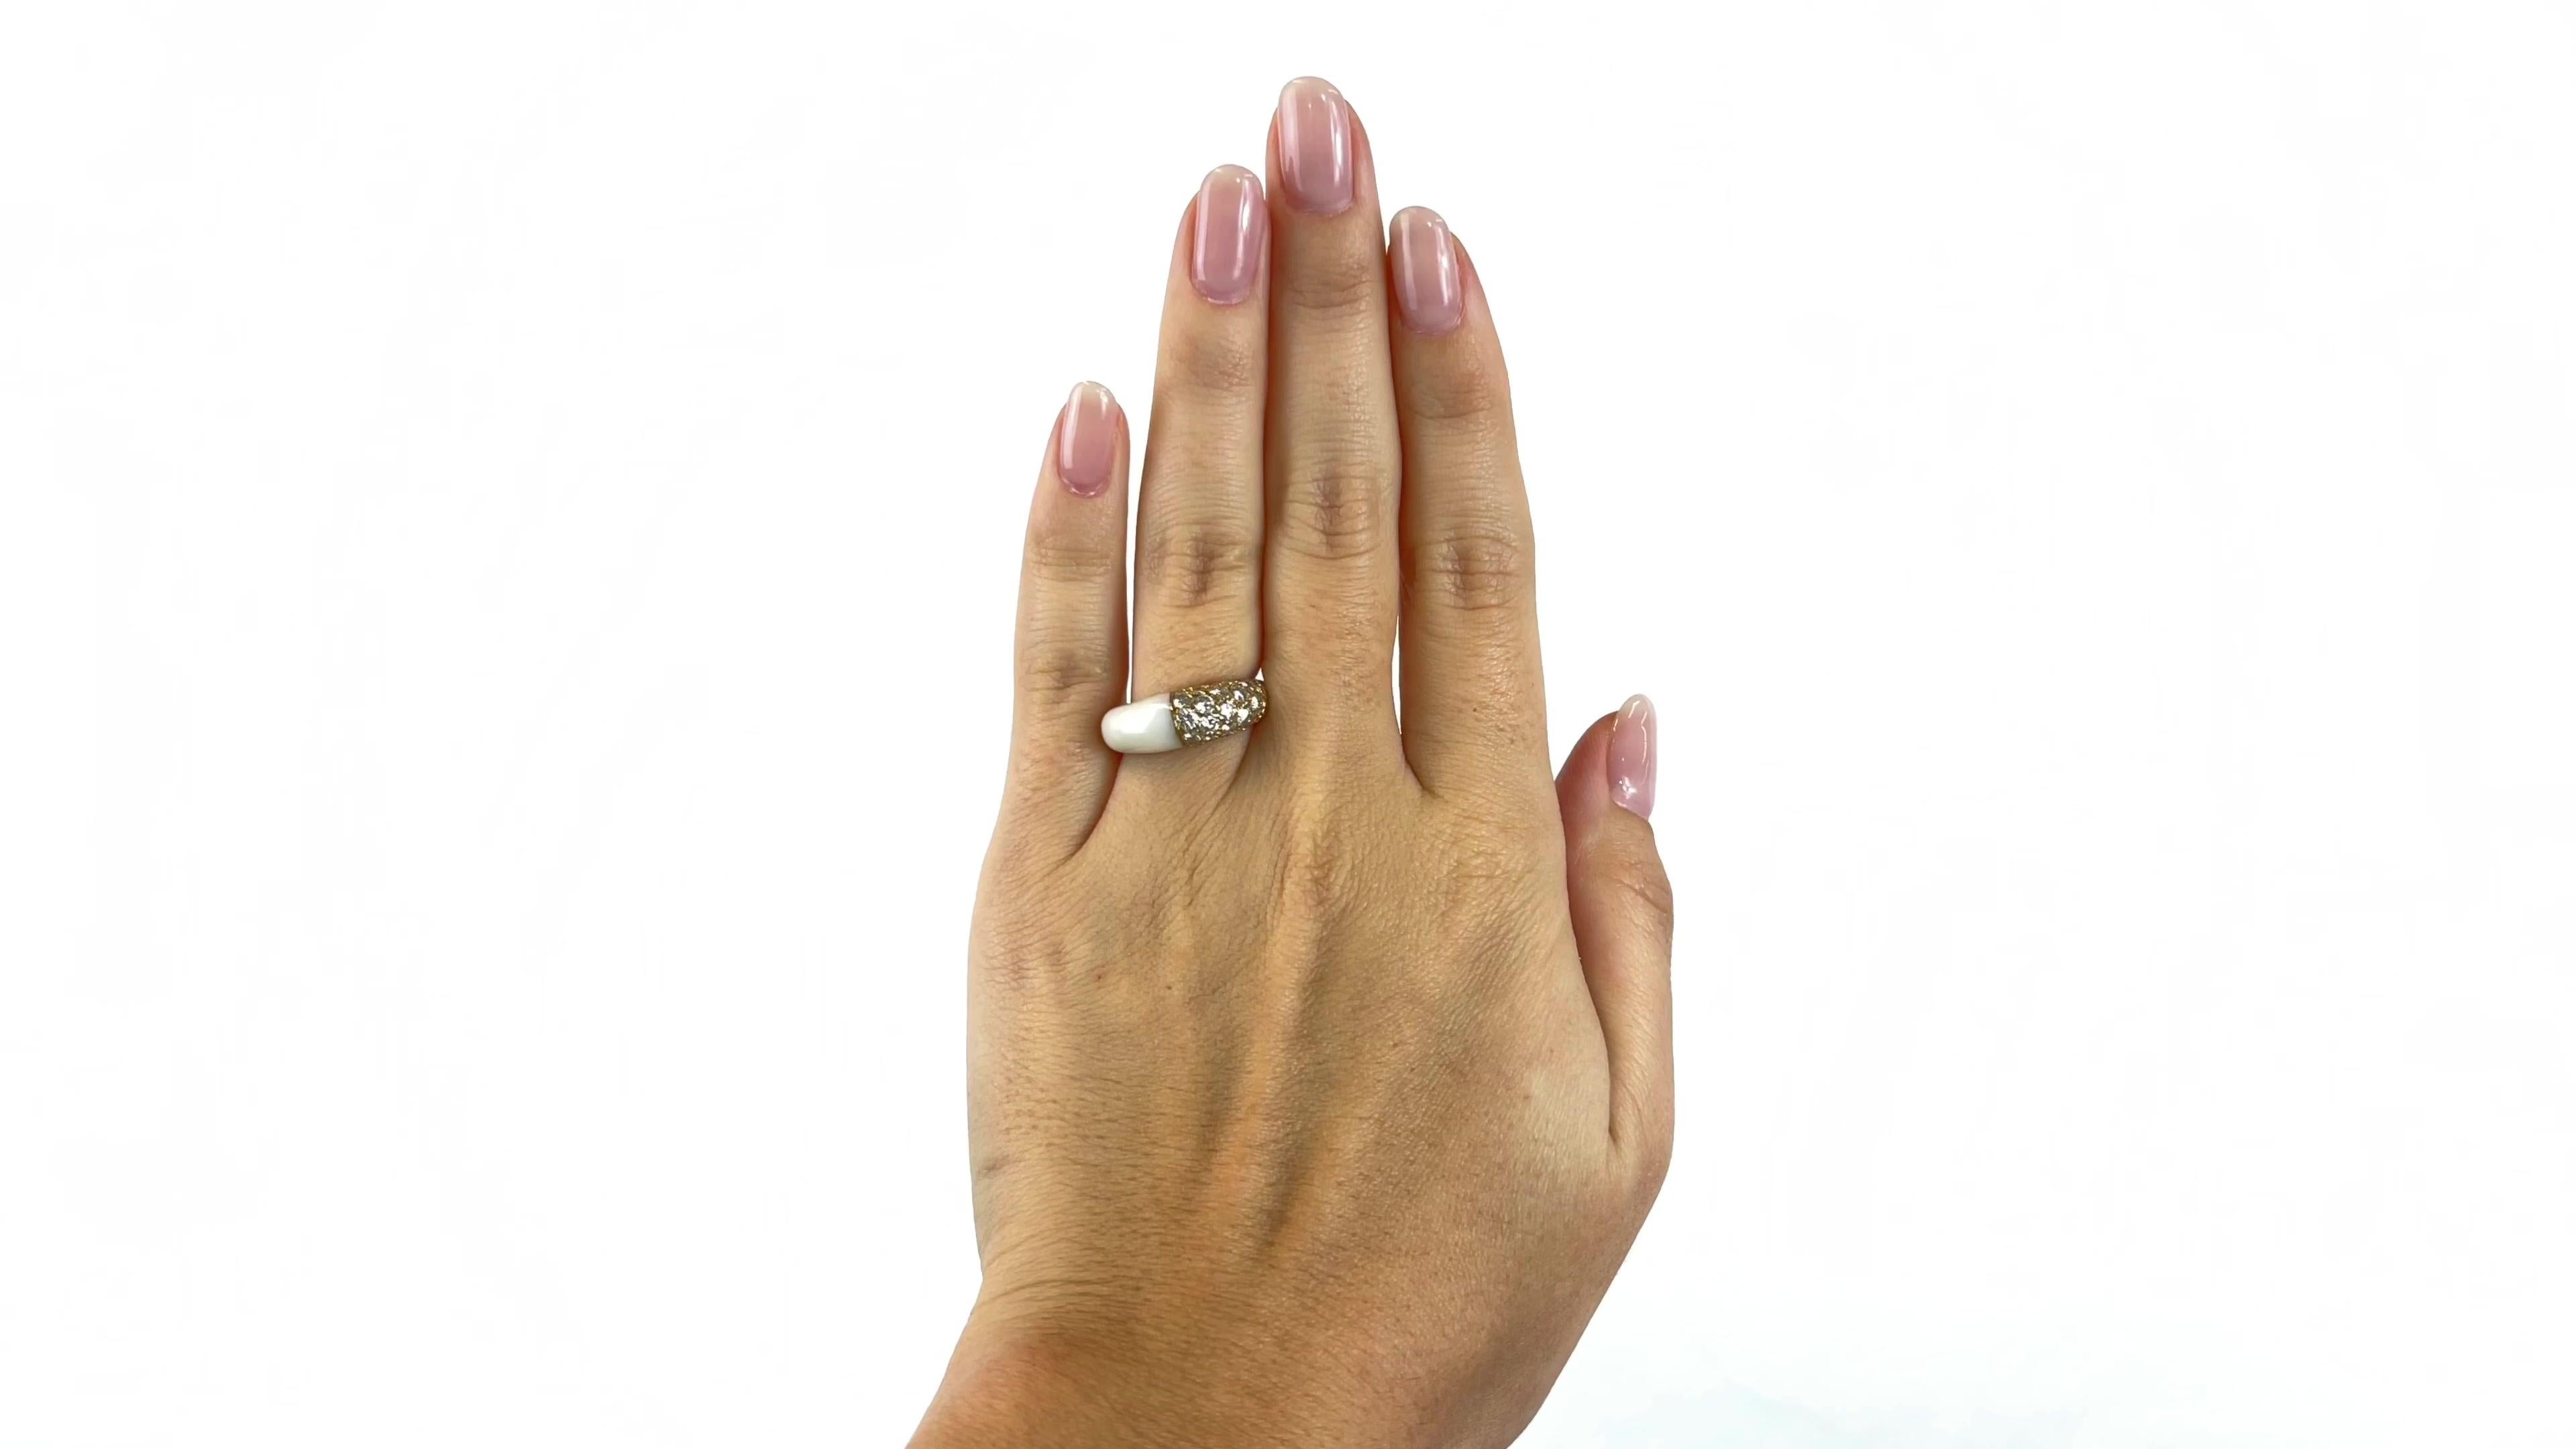 One Vintage Cartier Diamond White Coral 18 Karat Gold Ring. Featuring 40 round brilliant cut diamonds with a total weight of approximately 1.24 carats, graded D-E color, VVS clarity. Accented by one piece of polished, white coral. Crafted in 18